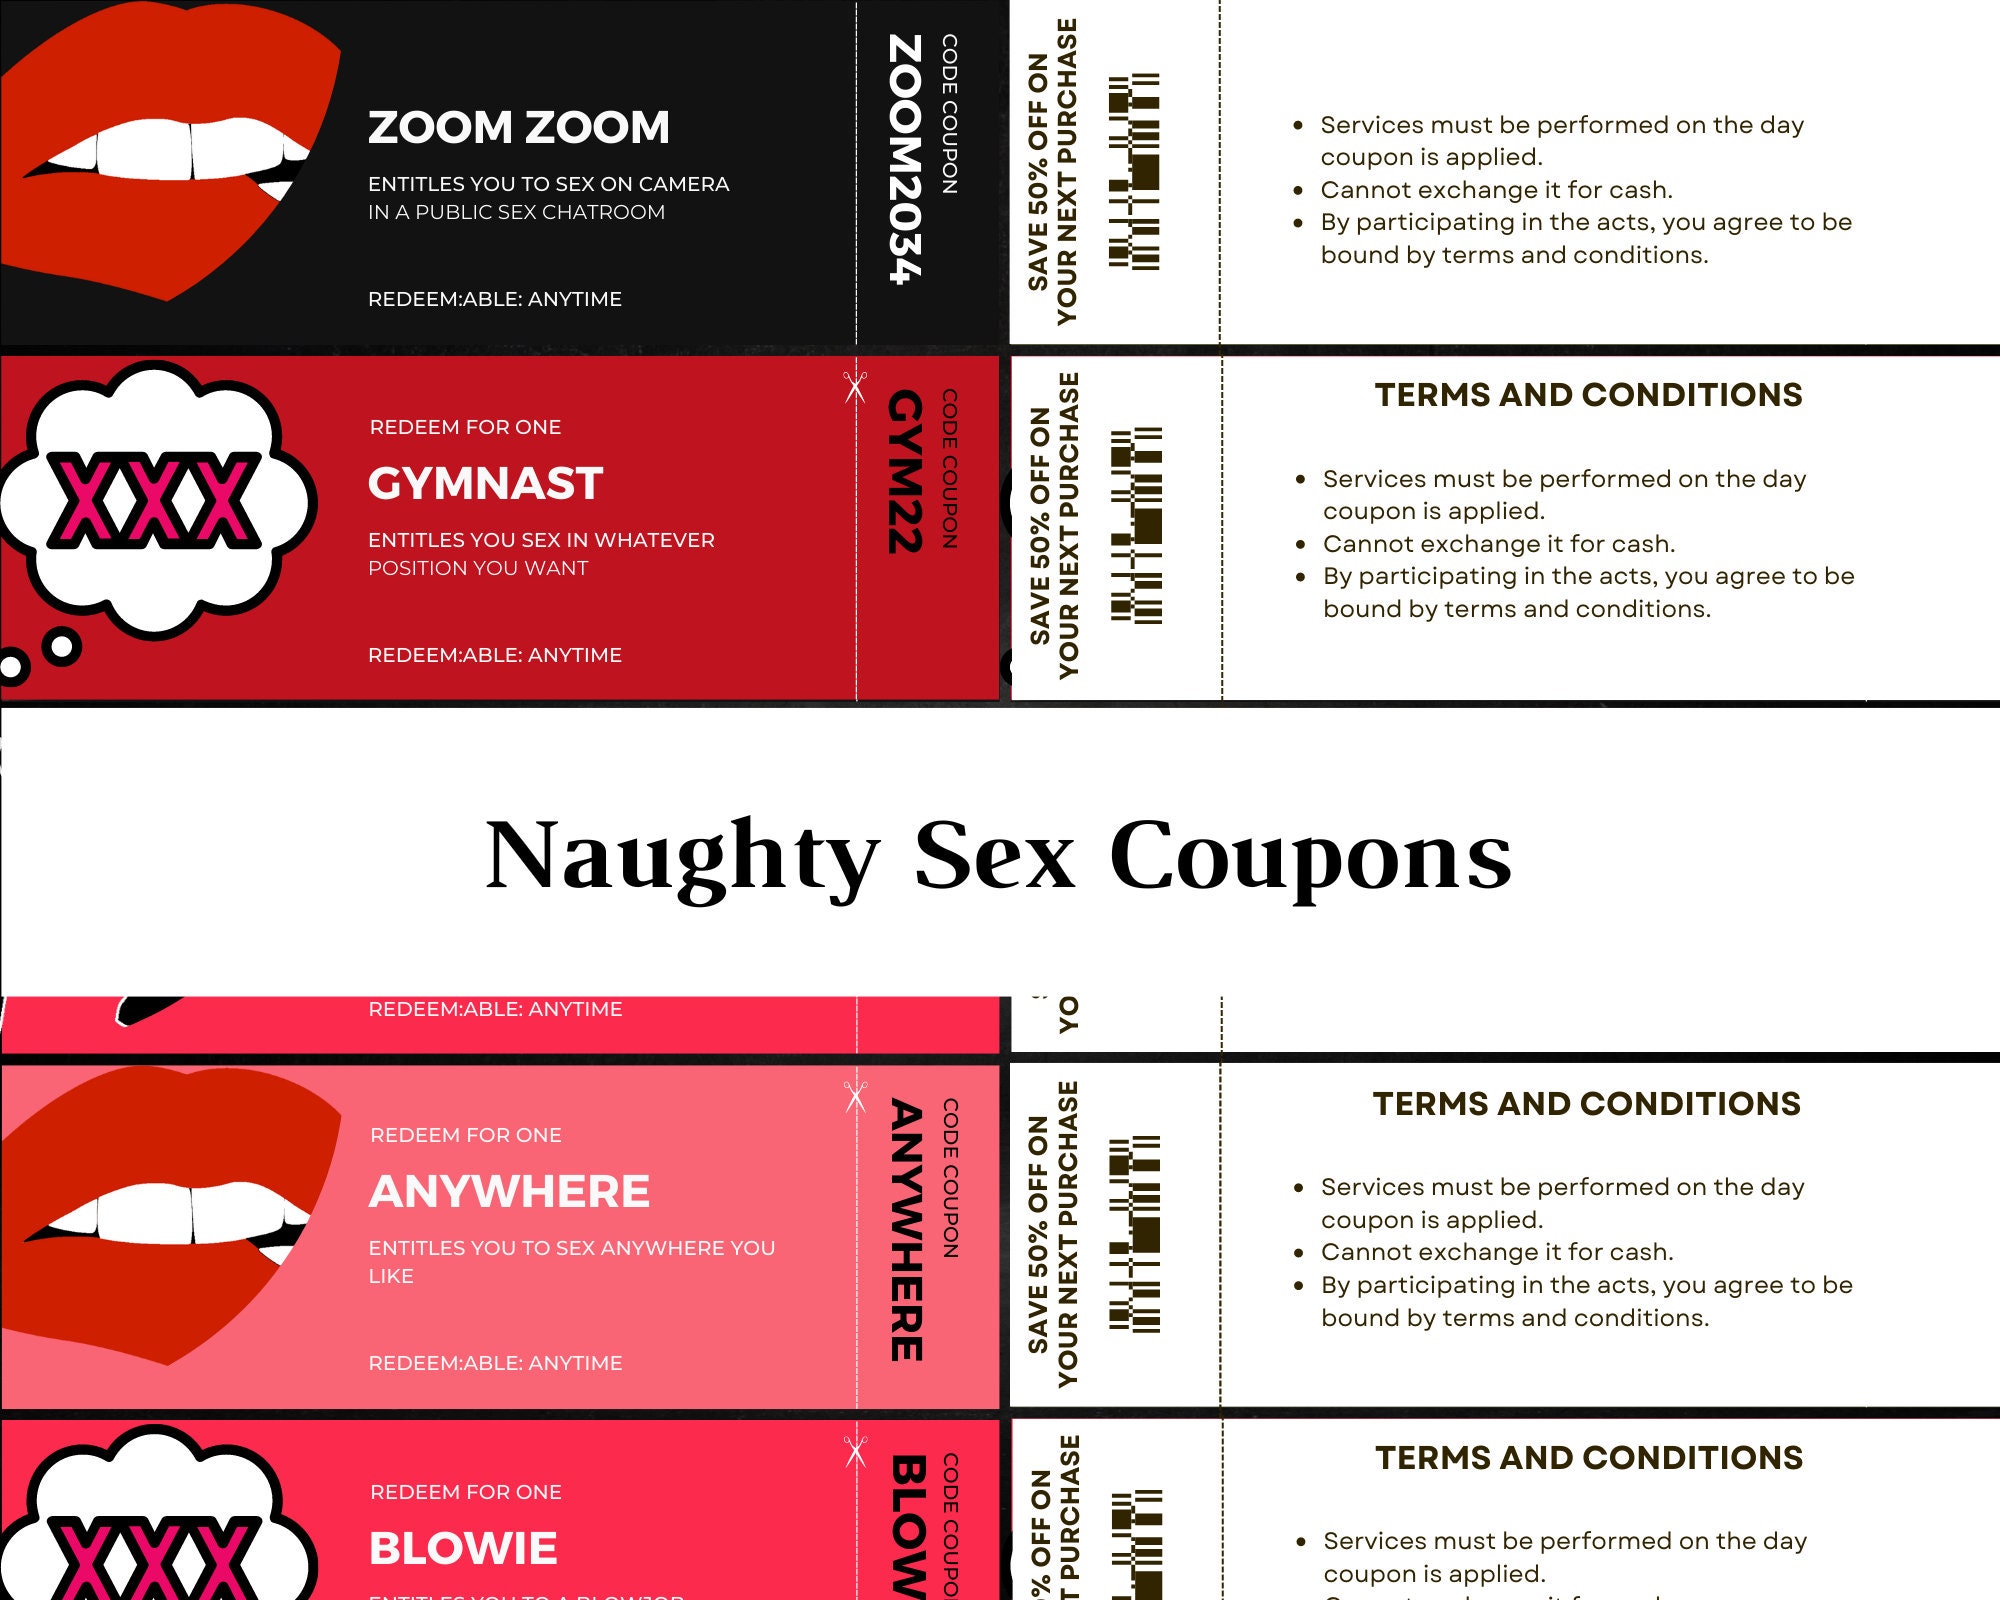 homemade coupons sexual favors Adult Pics Hq